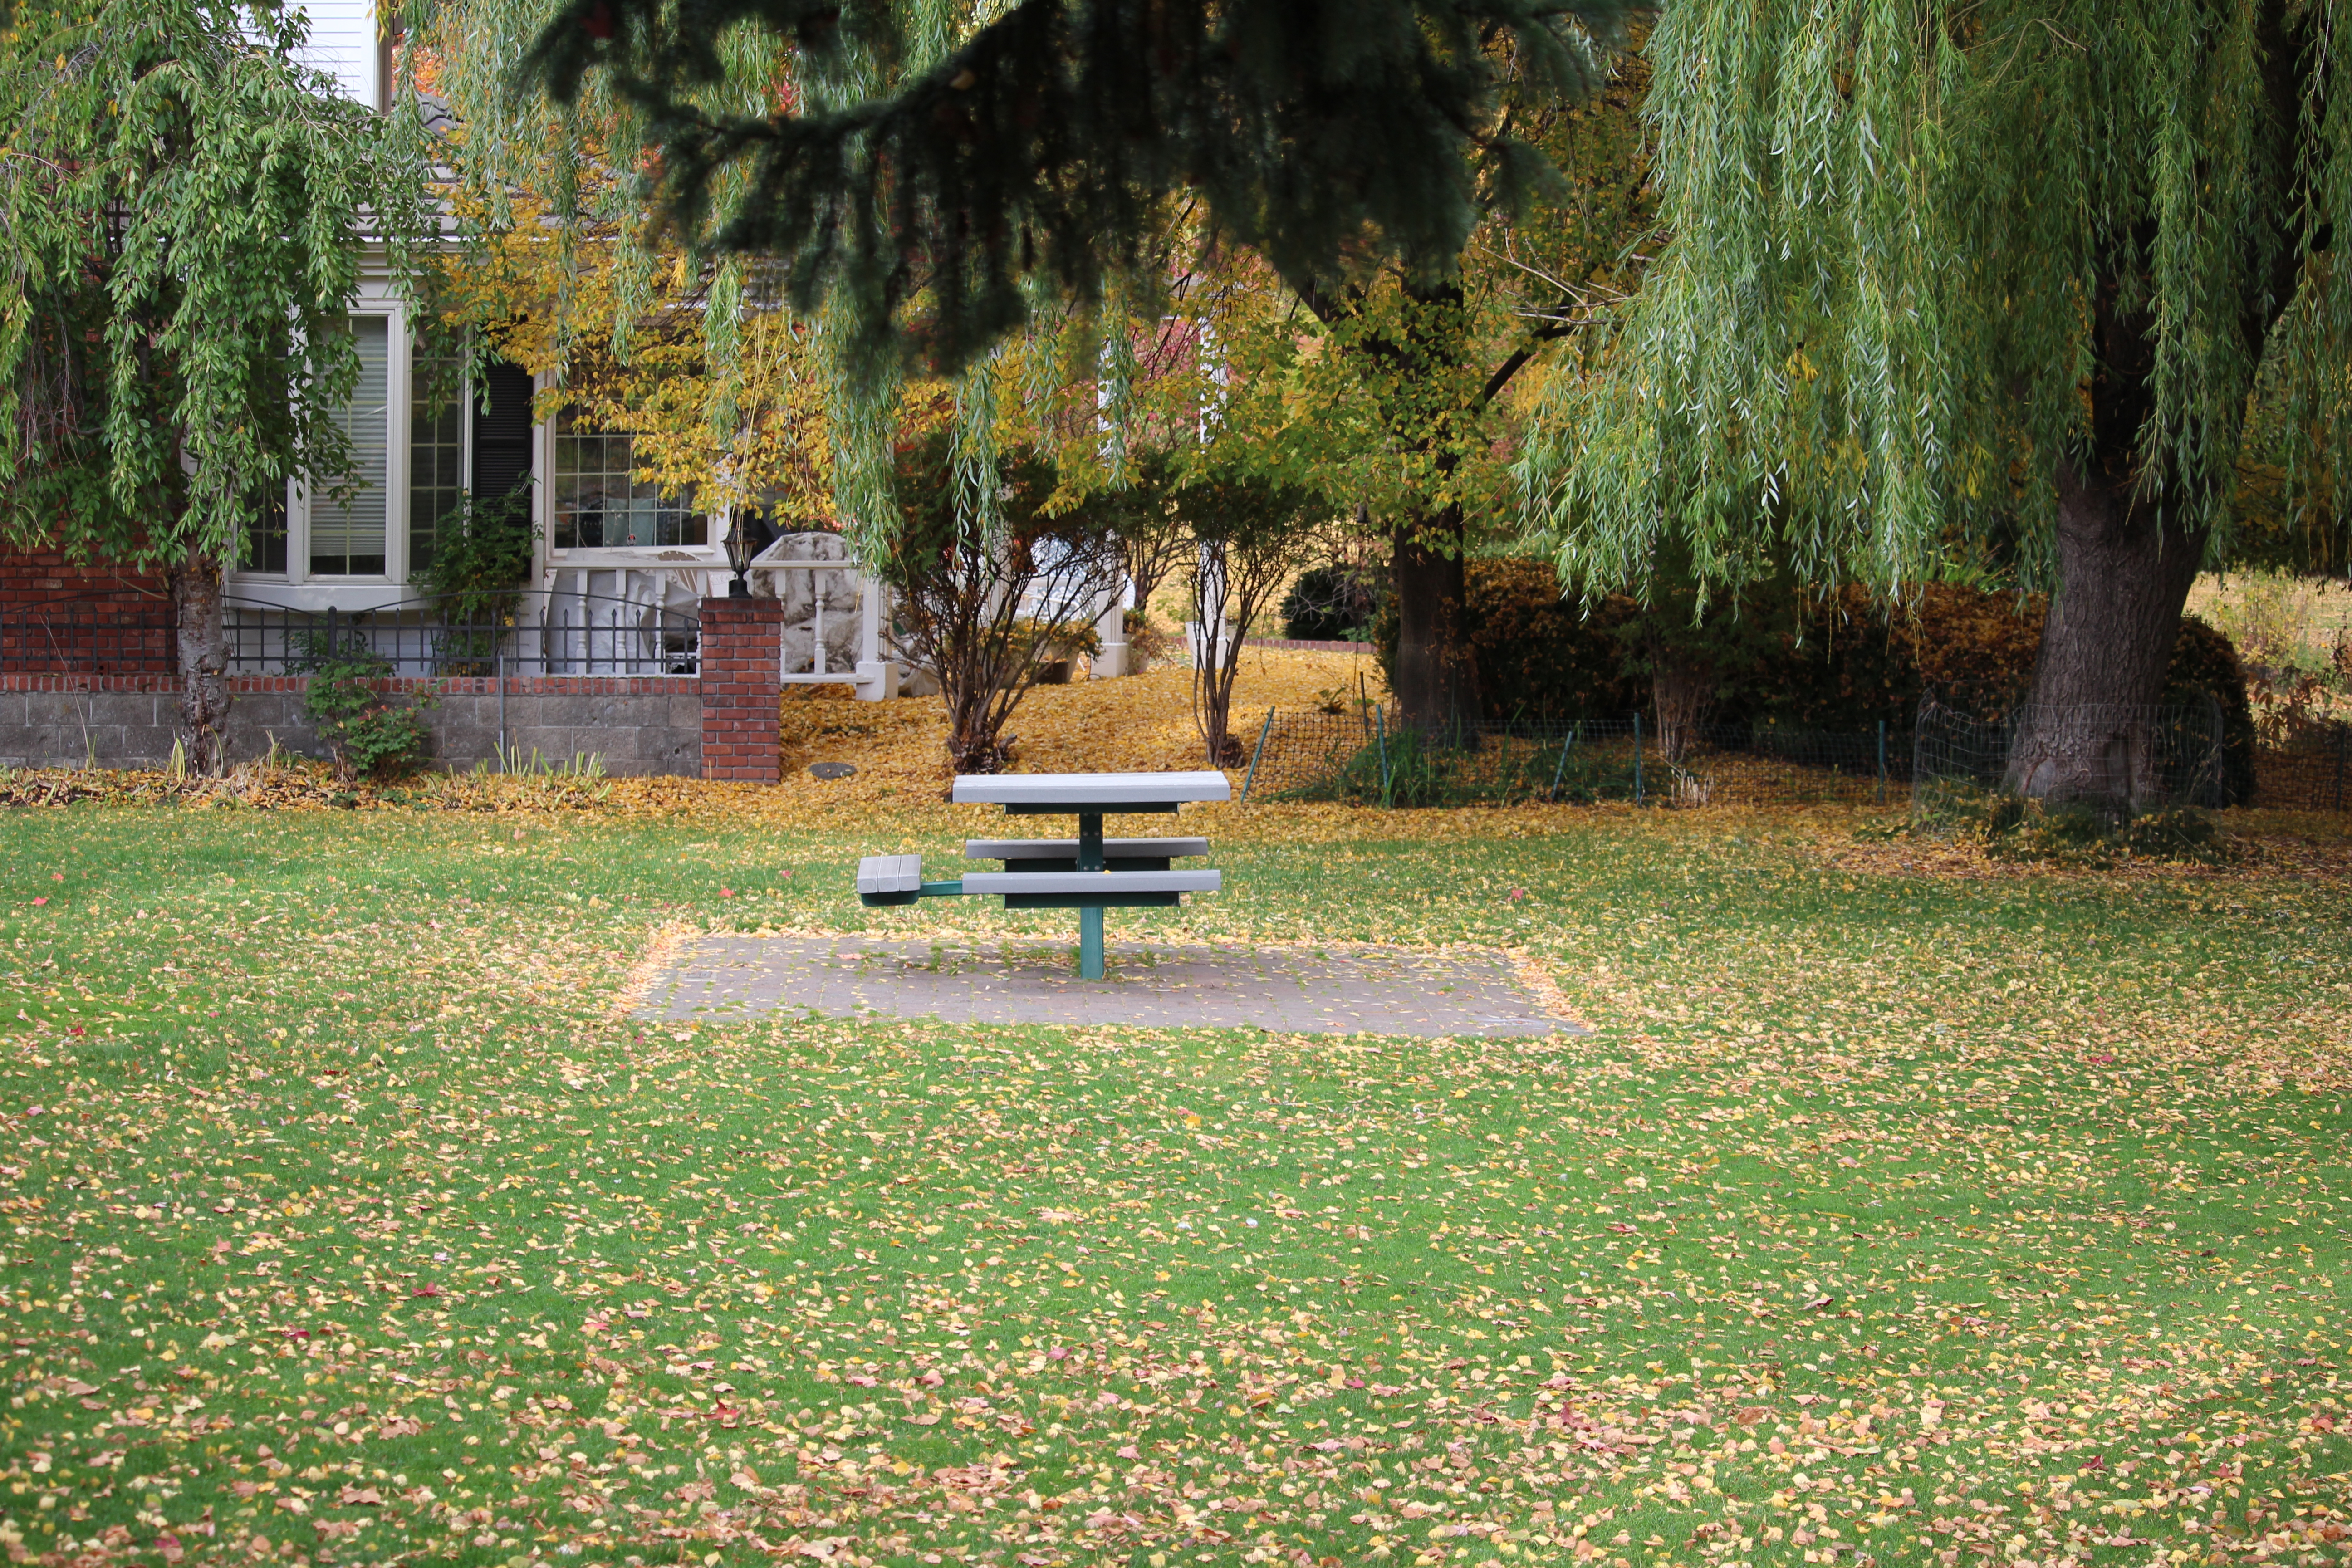 a picnic table in the grass at pageant park